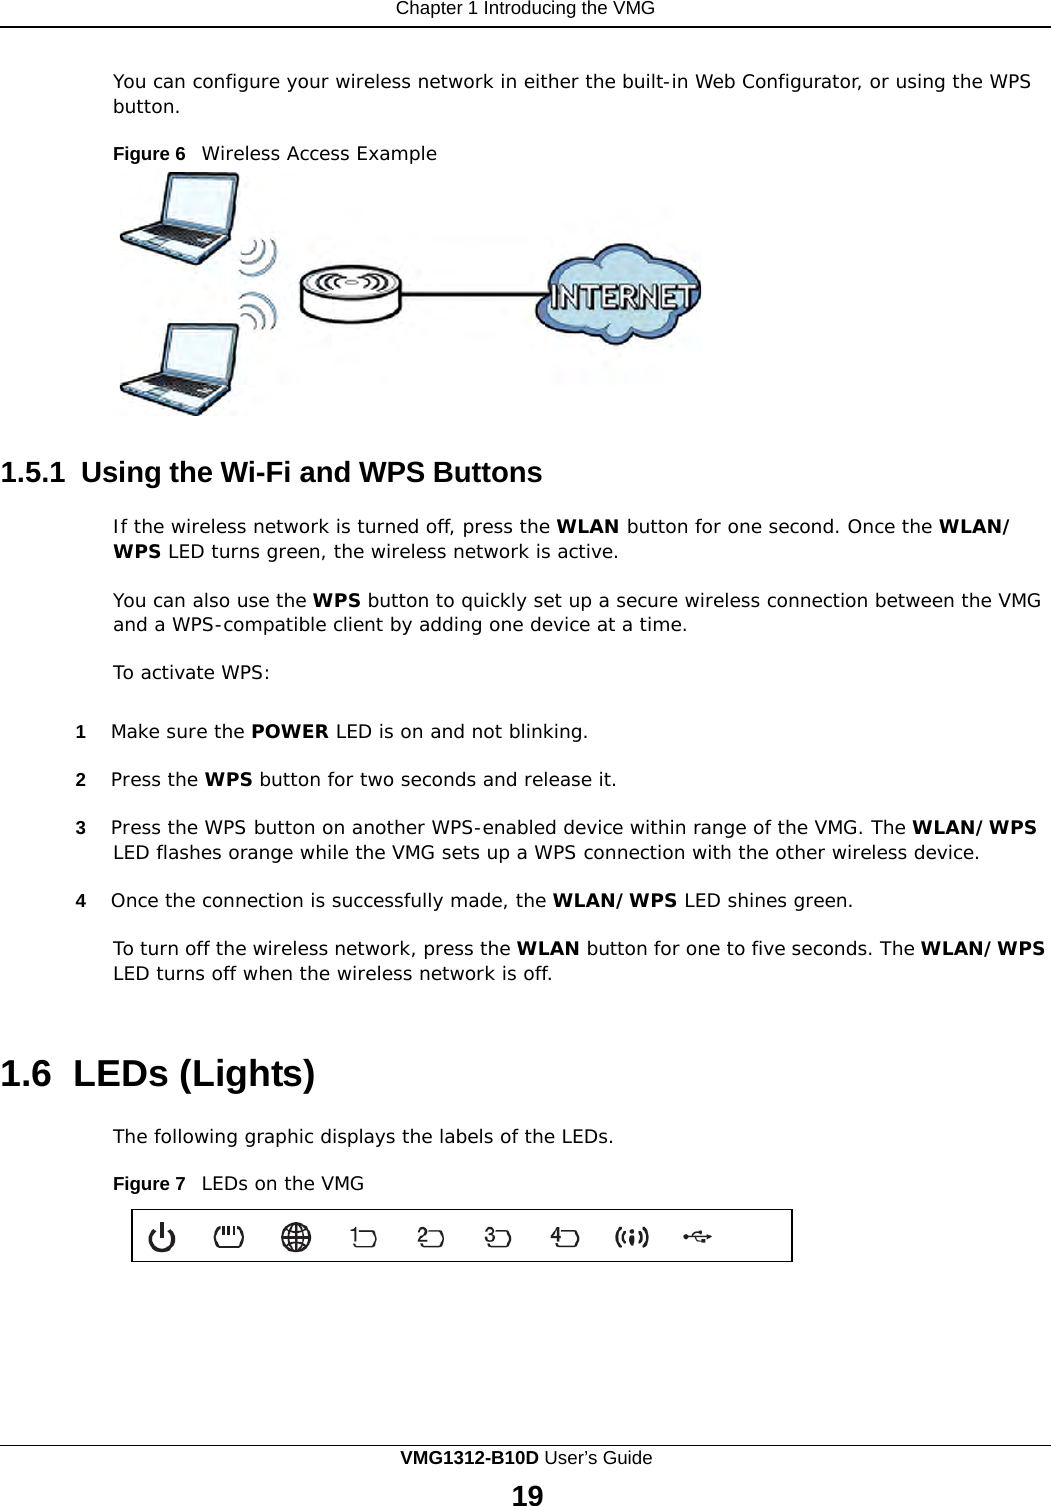 Chapter 1 Introducing the VMG      You can configure your wireless network in either the built-in Web Configurator, or using the WPS button.  Figure 6   Wireless Access Example    1.5.1 Using the Wi-Fi and WPS Buttons  If the wireless network is turned off, press the WLAN button for one second. Once the WLAN/ WPS LED turns green, the wireless network is active.  You can also use the WPS button to quickly set up a secure wireless connection between the VMG and a WPS-compatible client by adding one device at a time. To activate WPS:  1  Make sure the POWER LED is on and not blinking.  2  Press the WPS button for two seconds and release it.  3  Press the WPS button on another WPS-enabled device within range of the VMG. The WLAN/WPS LED flashes orange while the VMG sets up a WPS connection with the other wireless device.  4  Once the connection is successfully made, the WLAN/WPS LED shines green.  To turn off the wireless network, press the WLAN button for one to five seconds. The WLAN/WPS LED turns off when the wireless network is off.    1.6  LEDs (Lights)  The following graphic displays the labels of the LEDs.  Figure 7   LEDs on the VMG VMG1312-B10D User’s Guide 19  